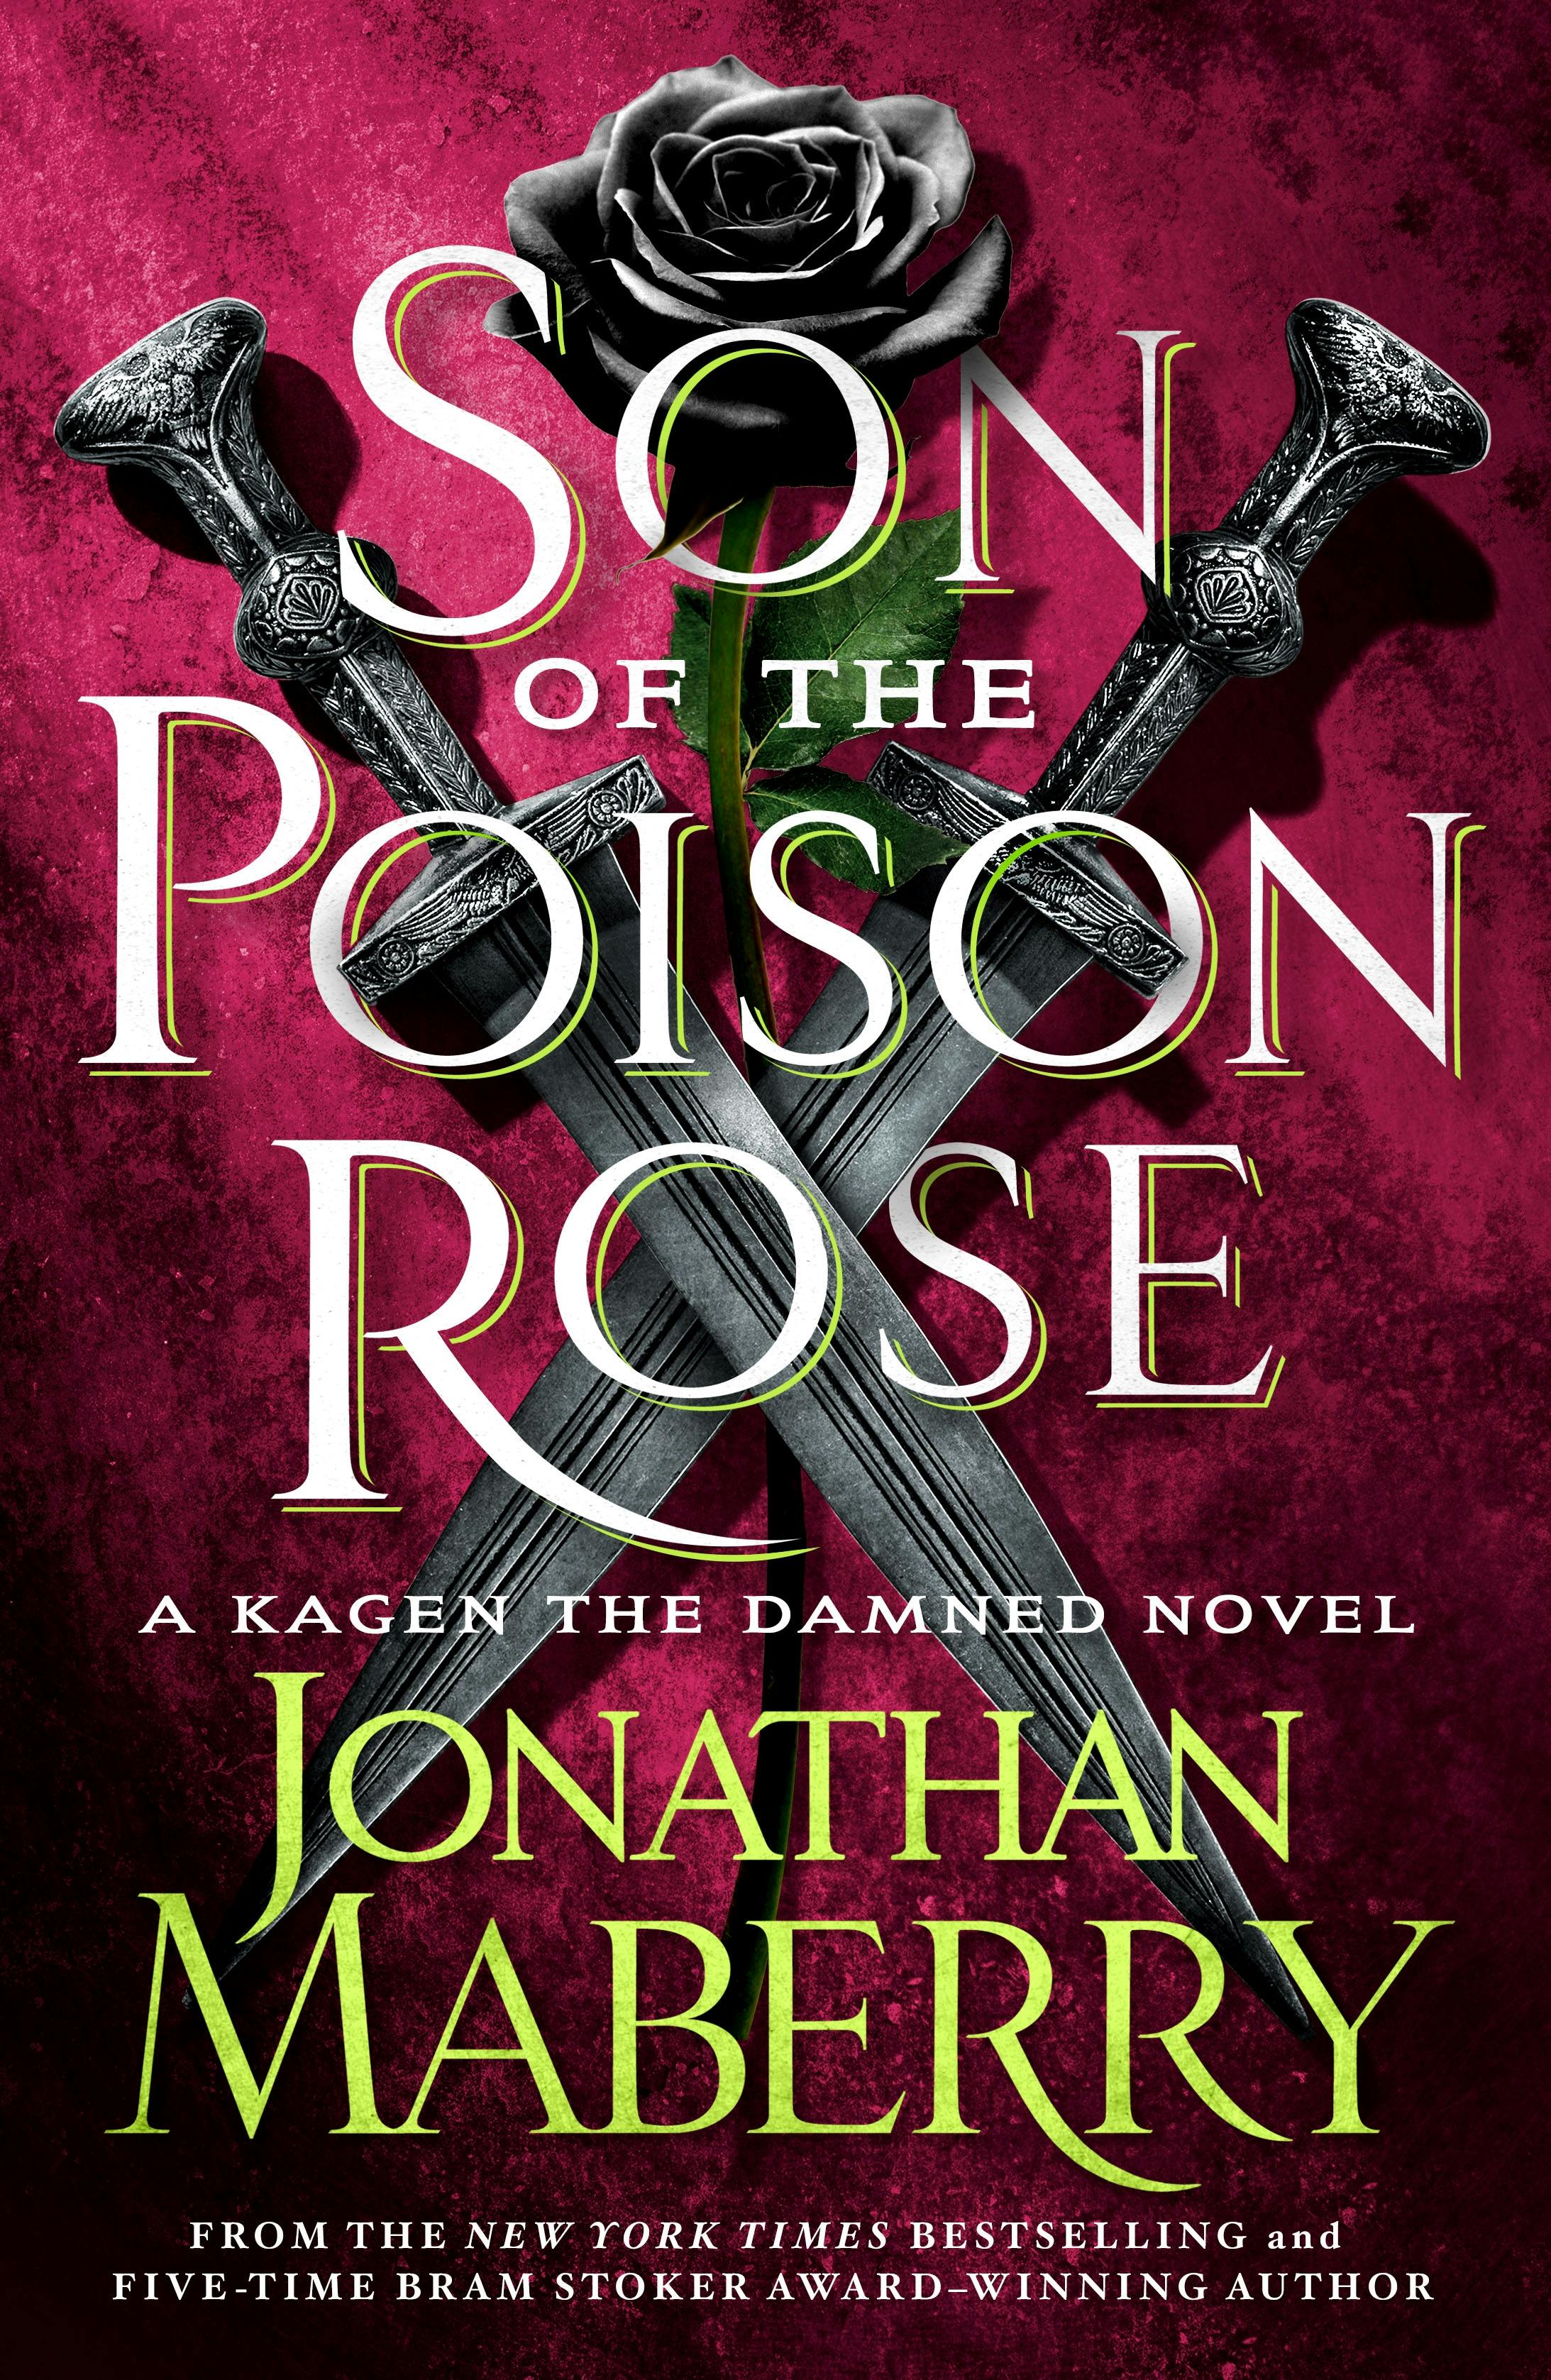 Son of the Poison Rose